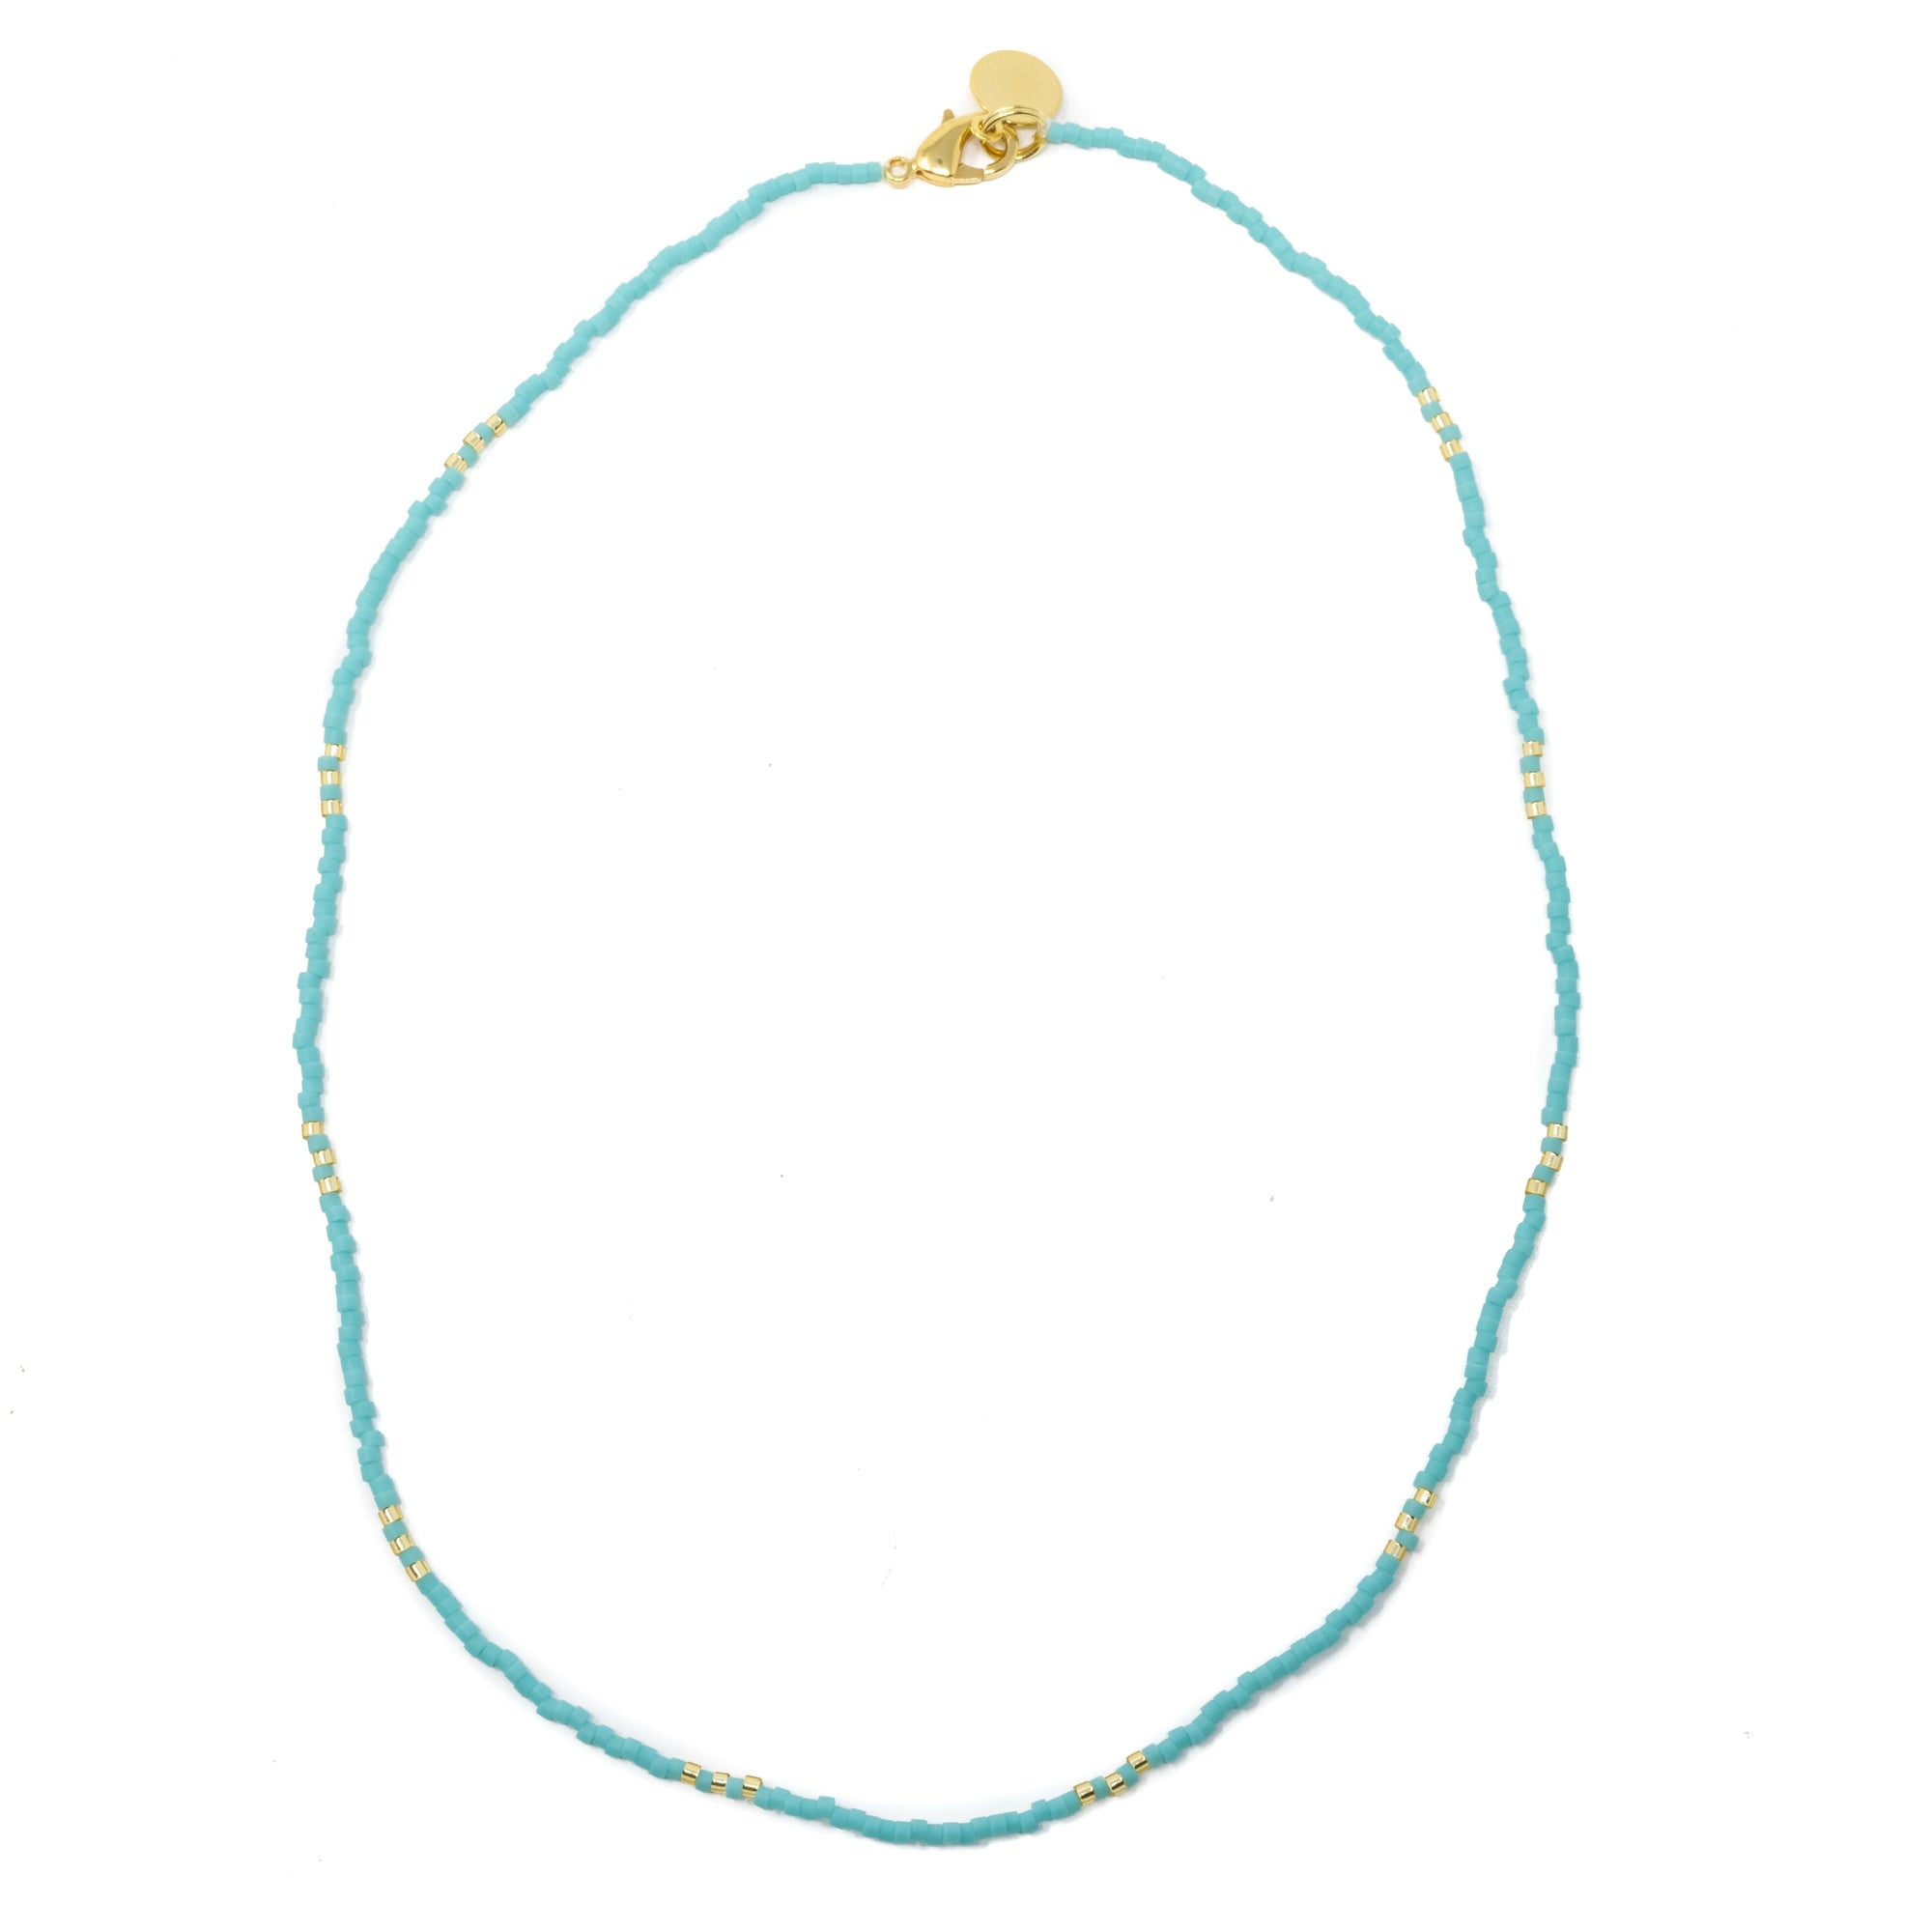 Teal & Sparkle Gold Simple Statement Necklace